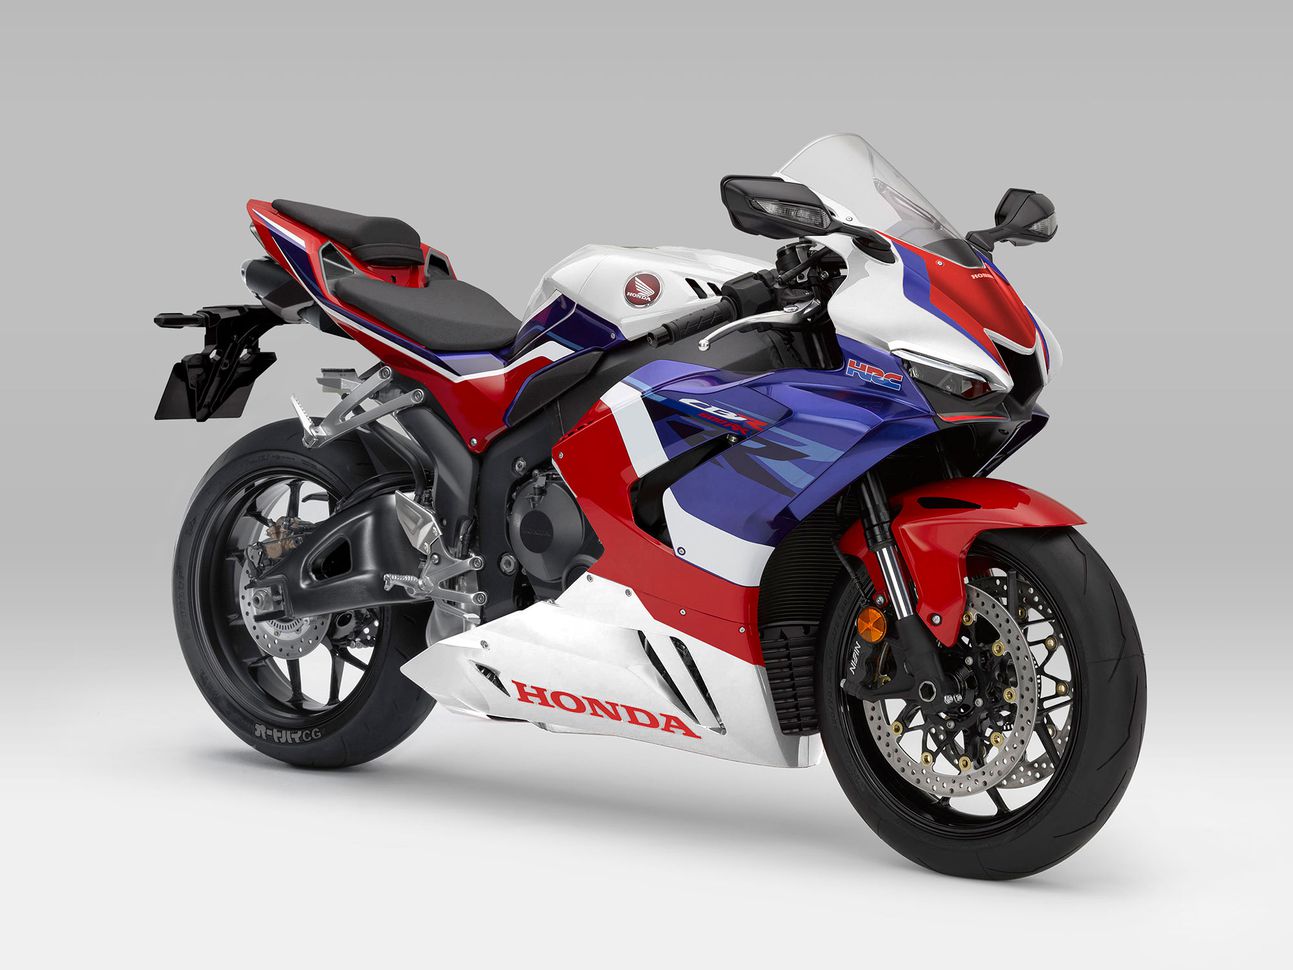 Could This Be How the New Honda CBR600RR Looks Like? | DriveMag Riders